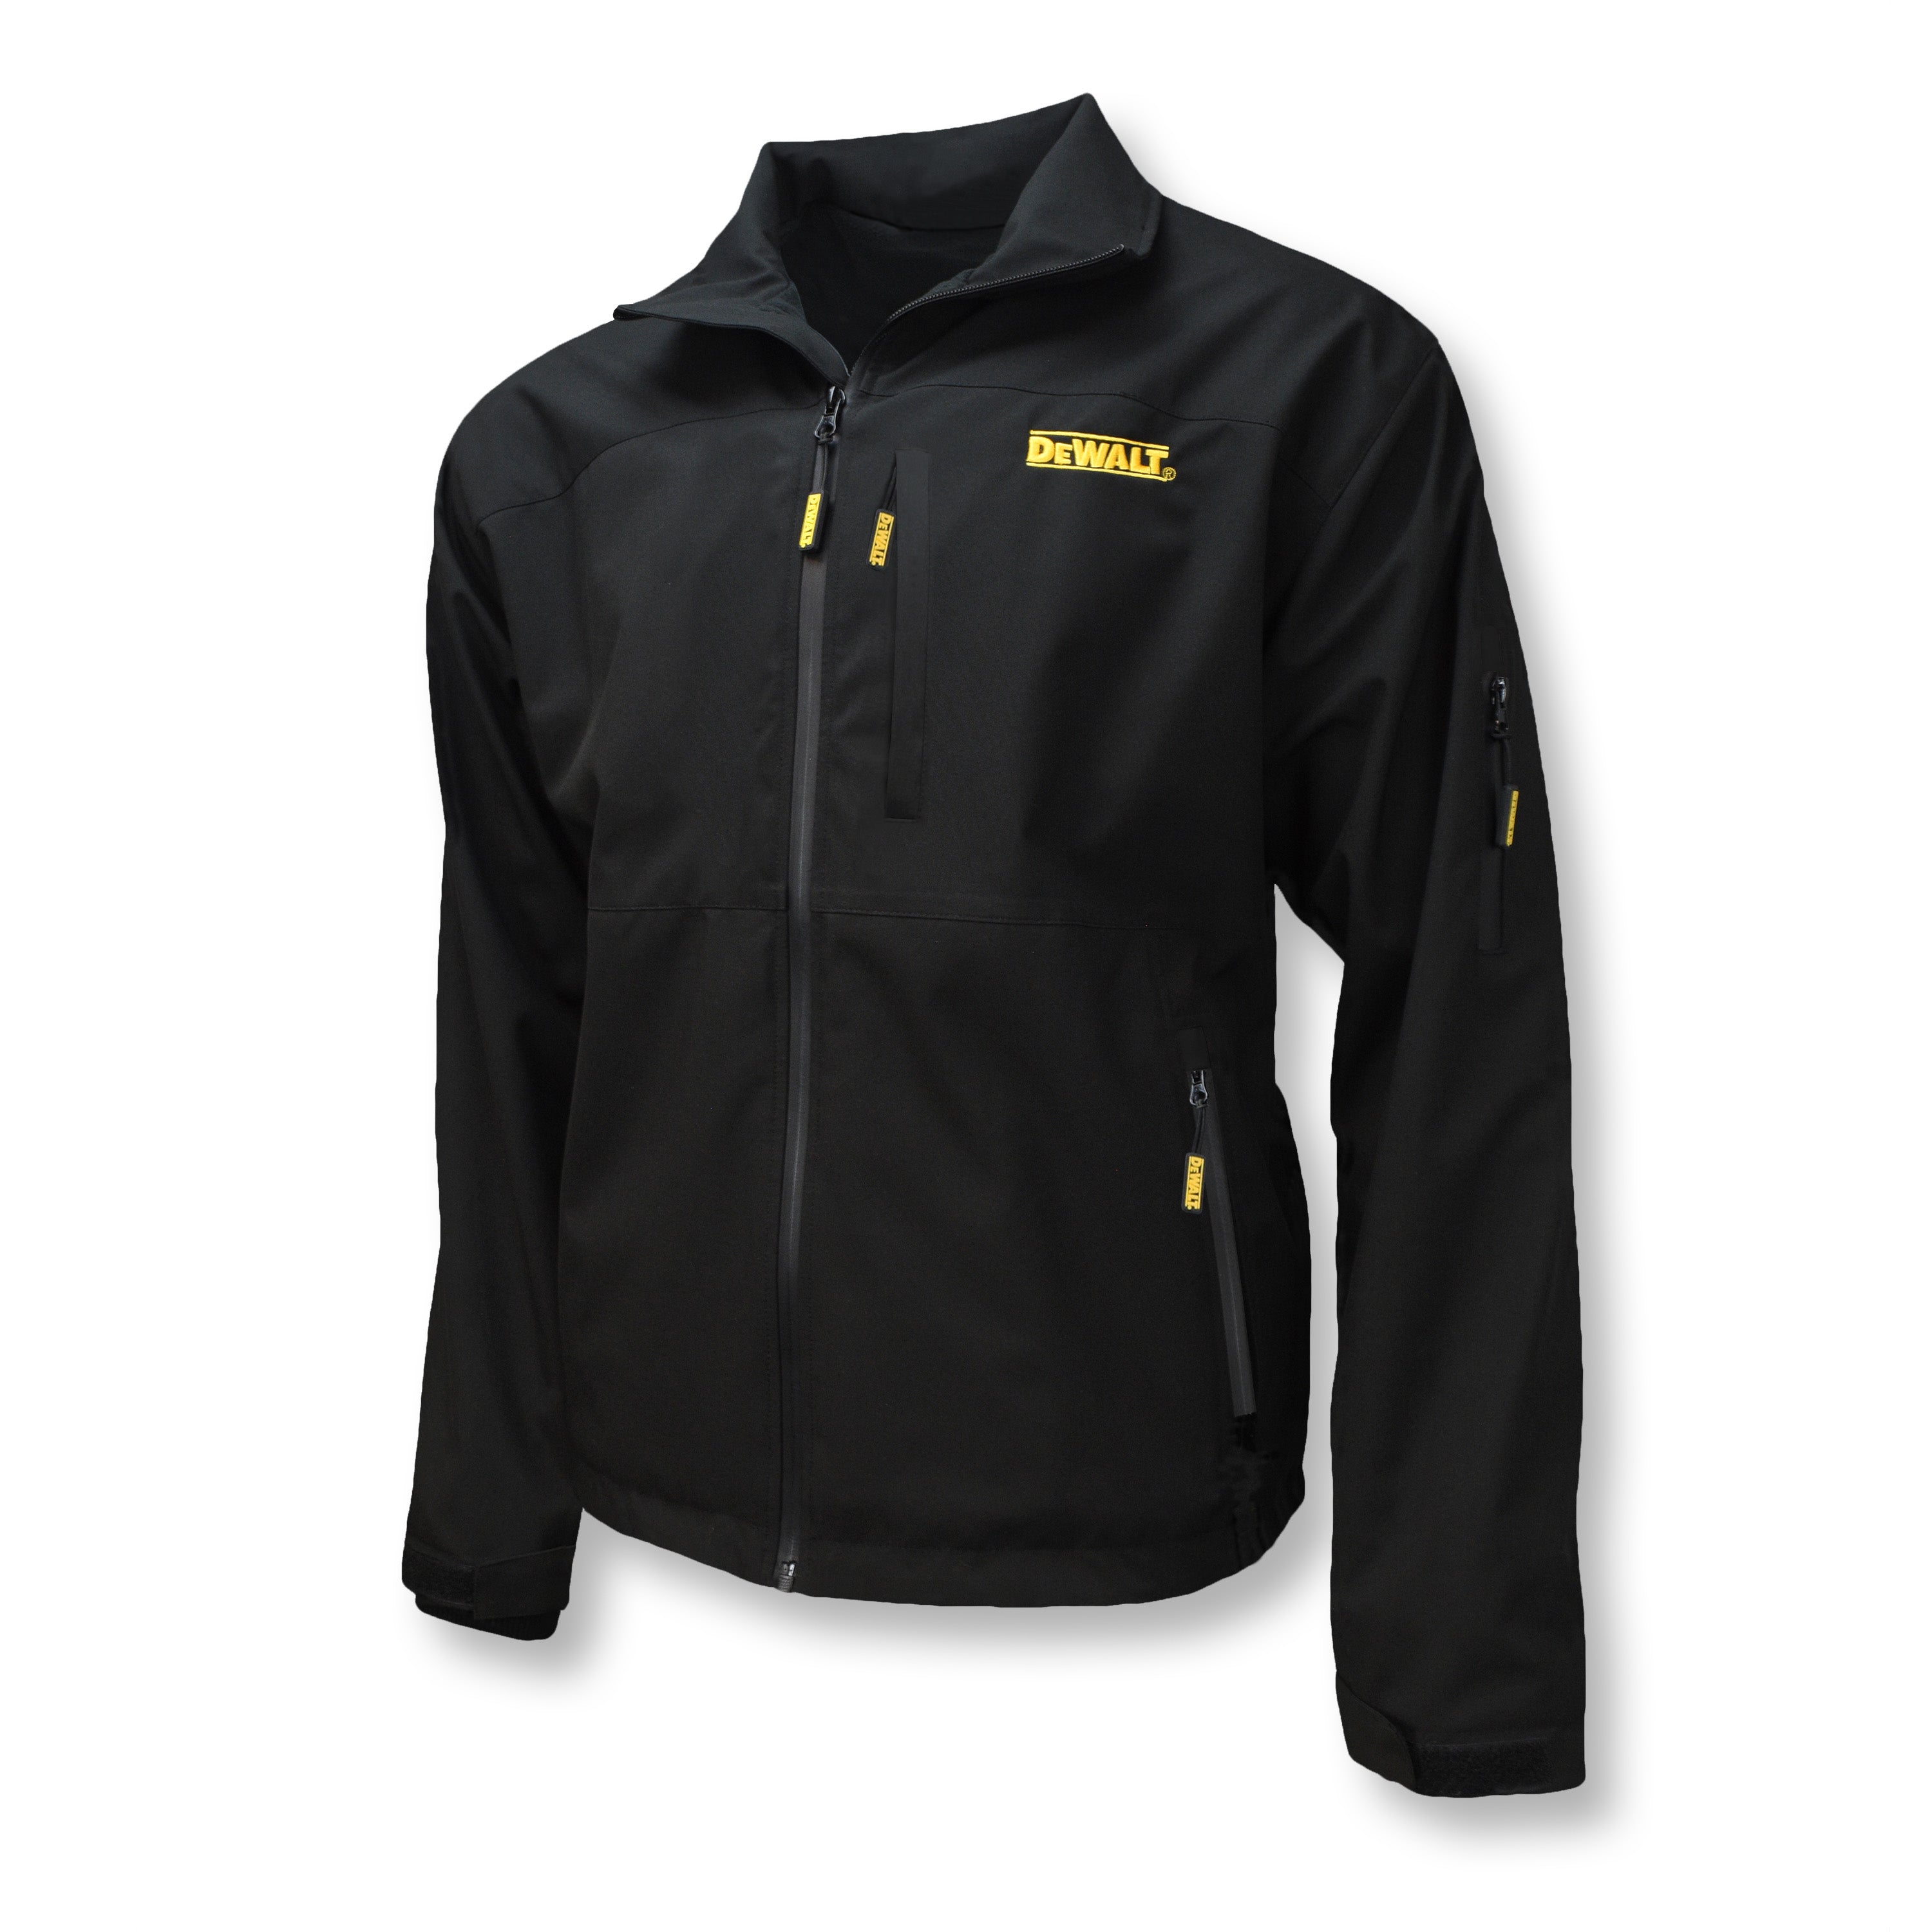 DEWALT Men's Heated Structured Soft Shell Jacket without Battery